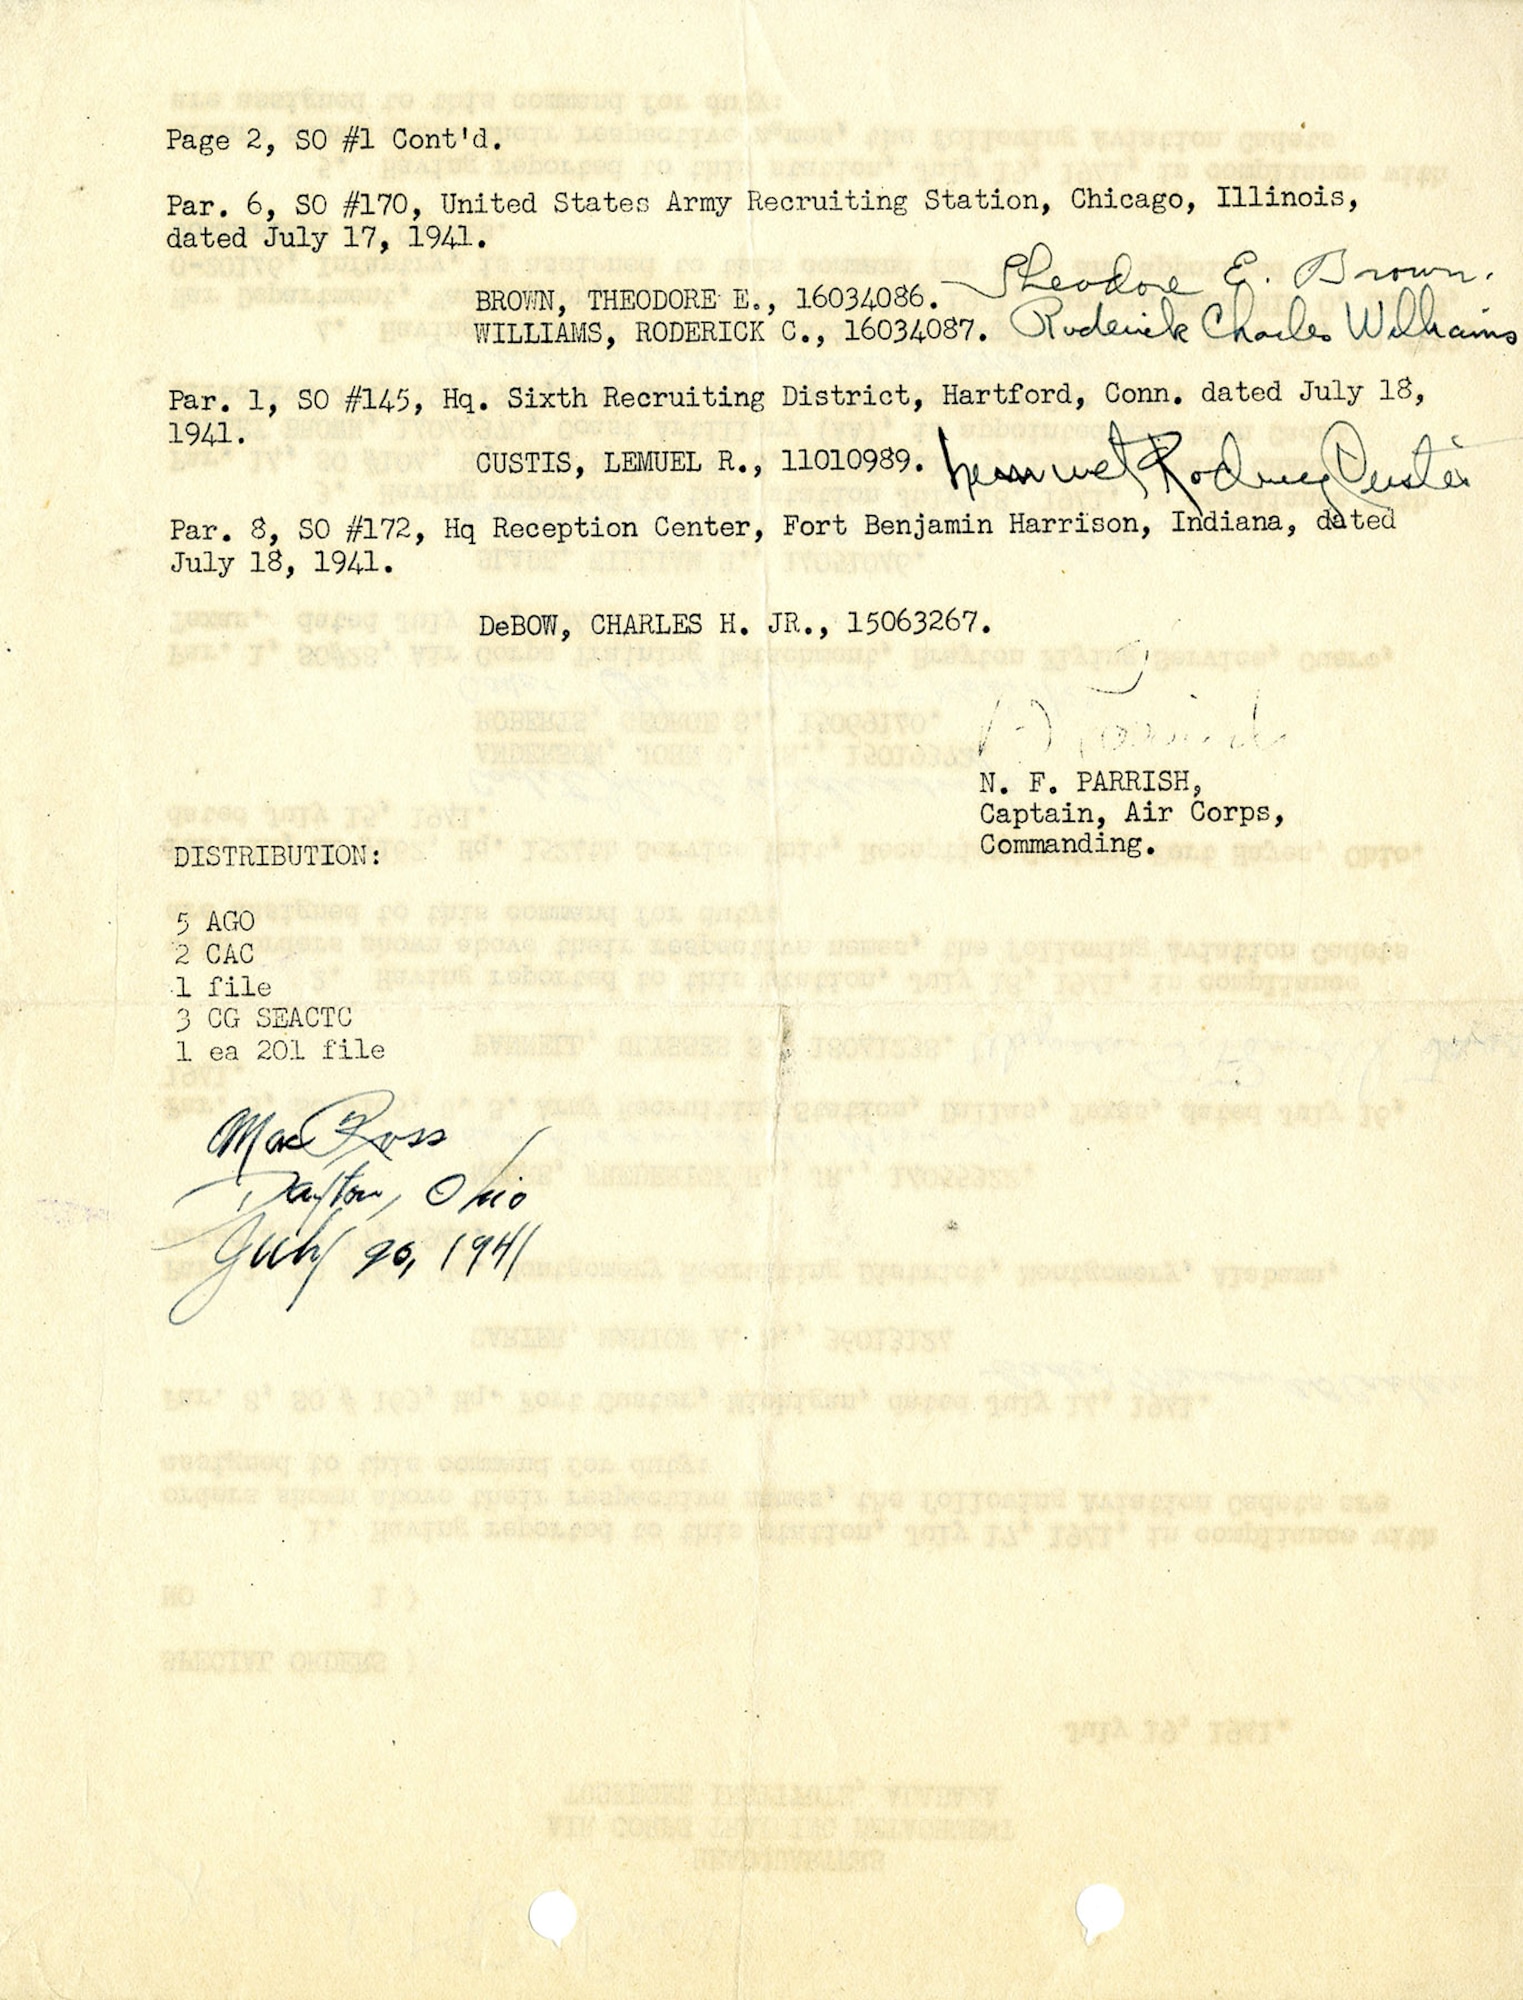 [Side 2] Orders assigning the first aviation cadets to Tuskegee. (U.S. Air Force photo)